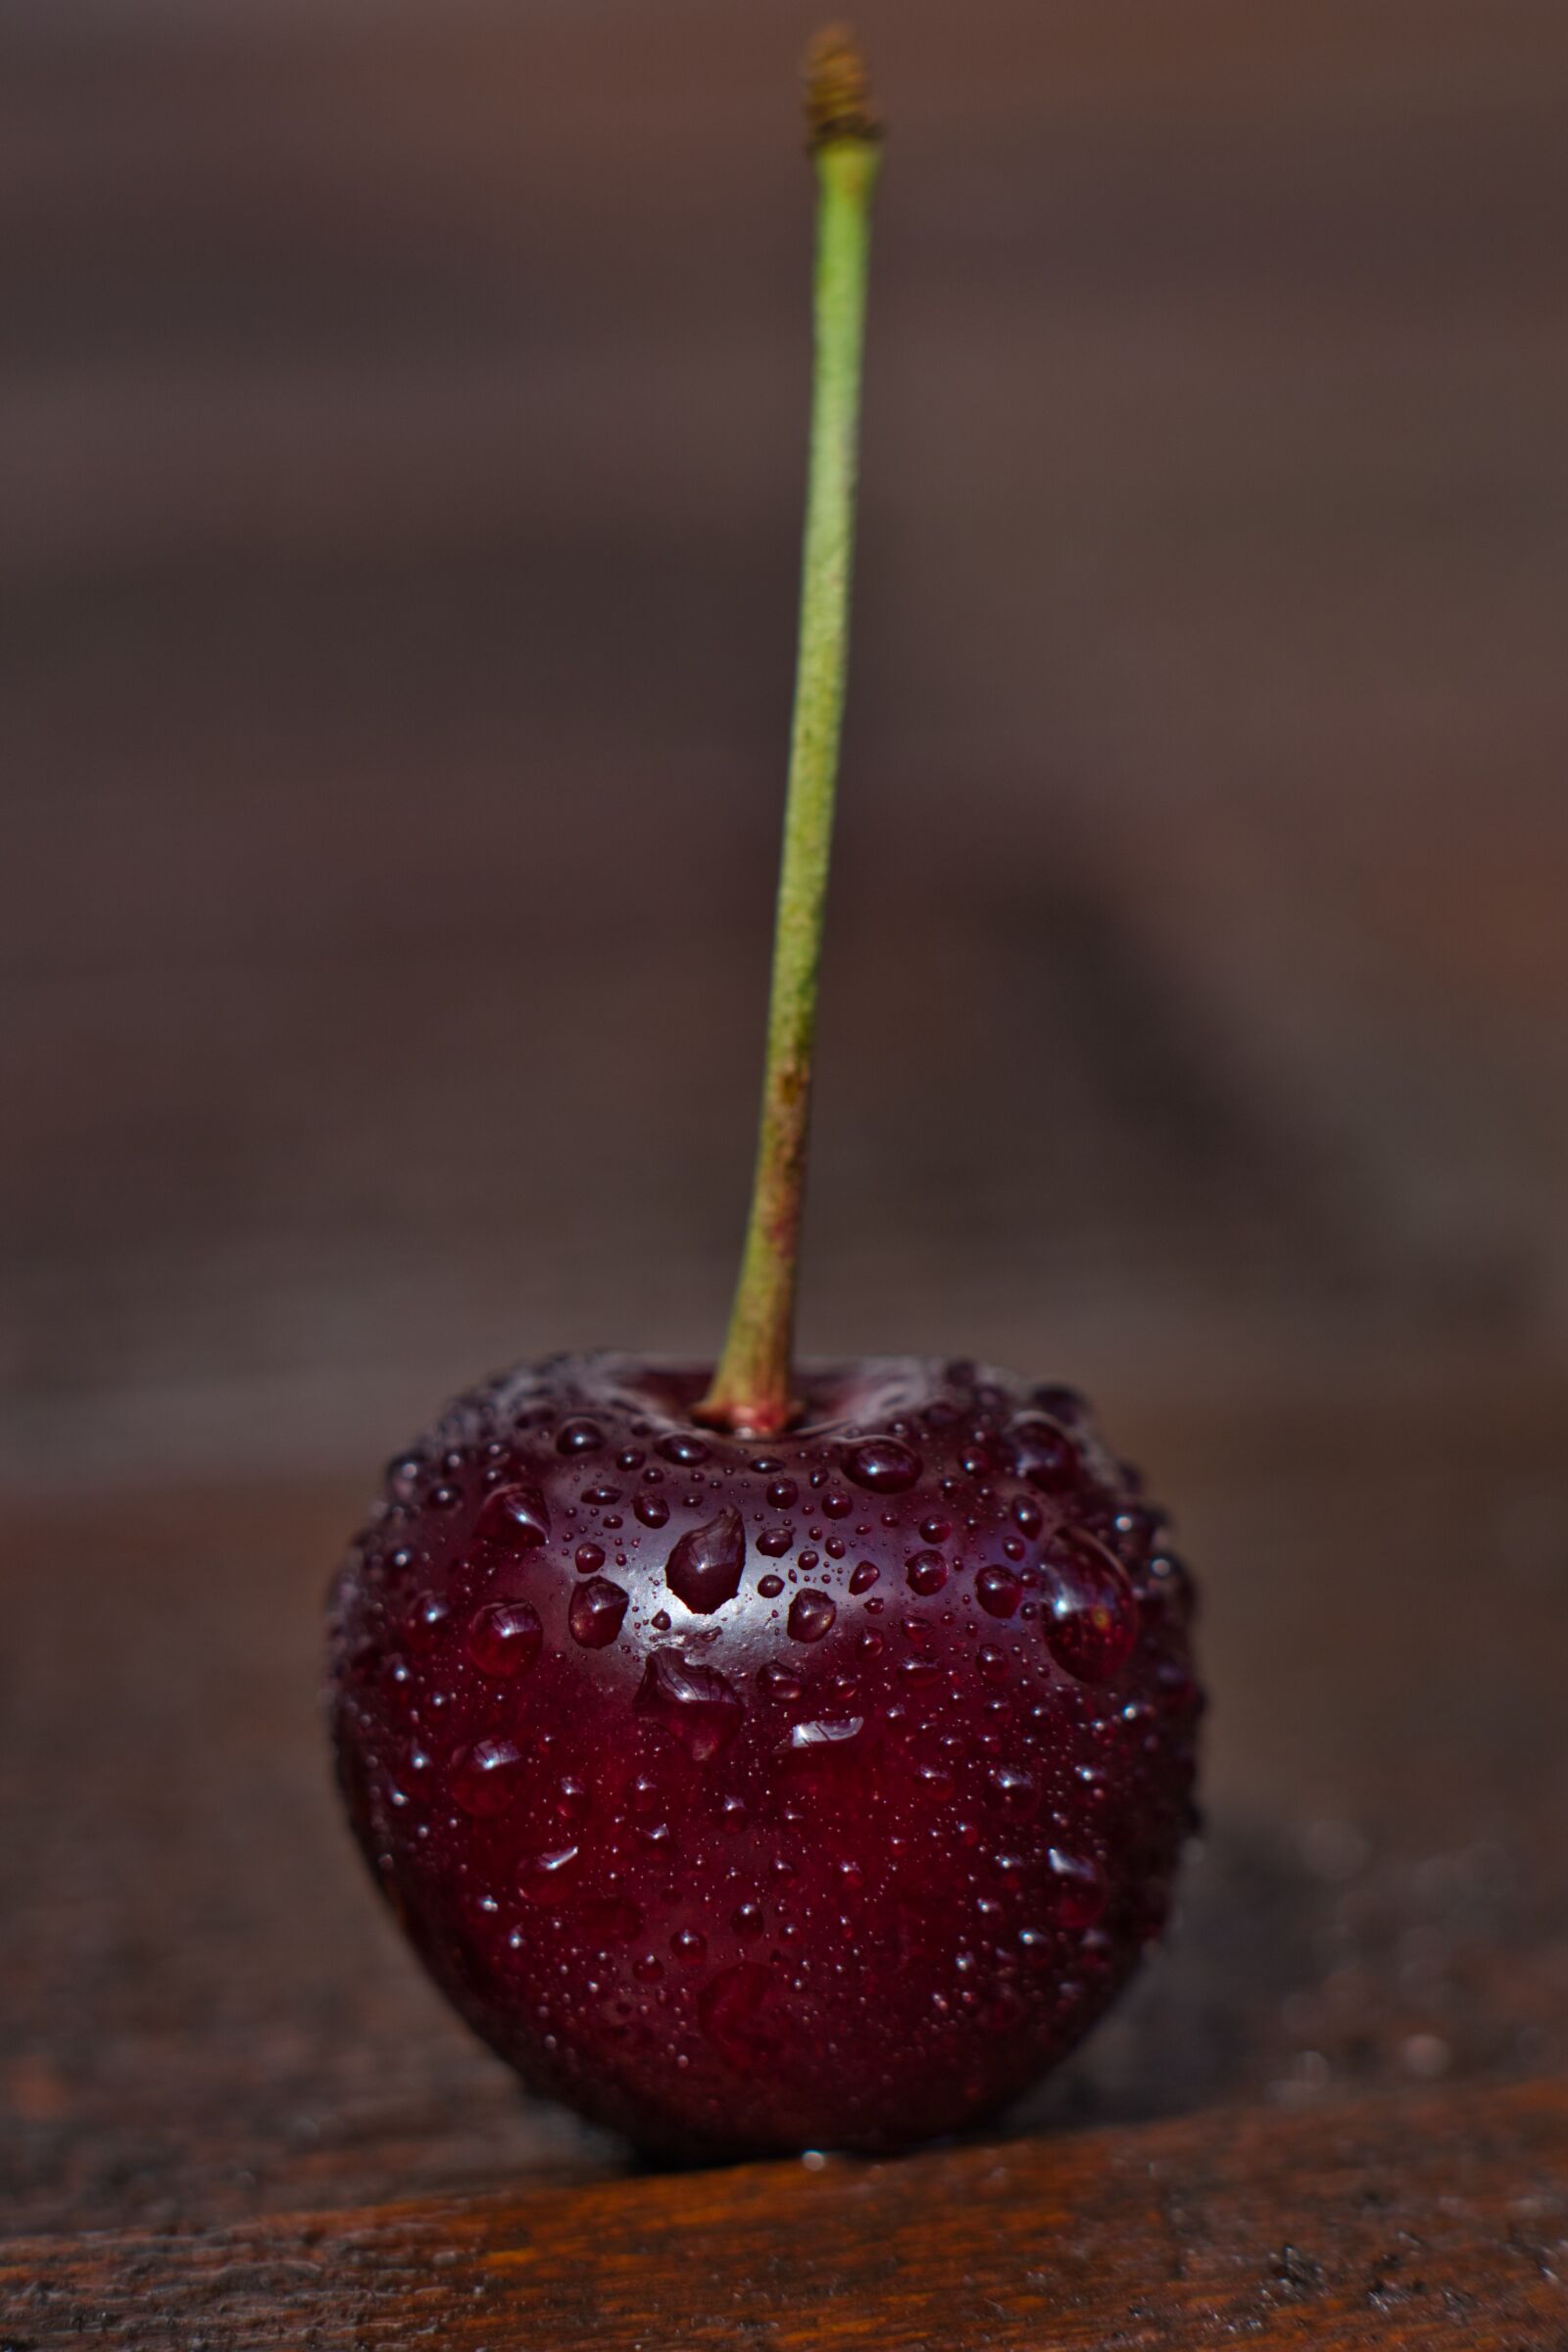 Sony a6400 sample photo. Cherry, fruit, self-picked photography